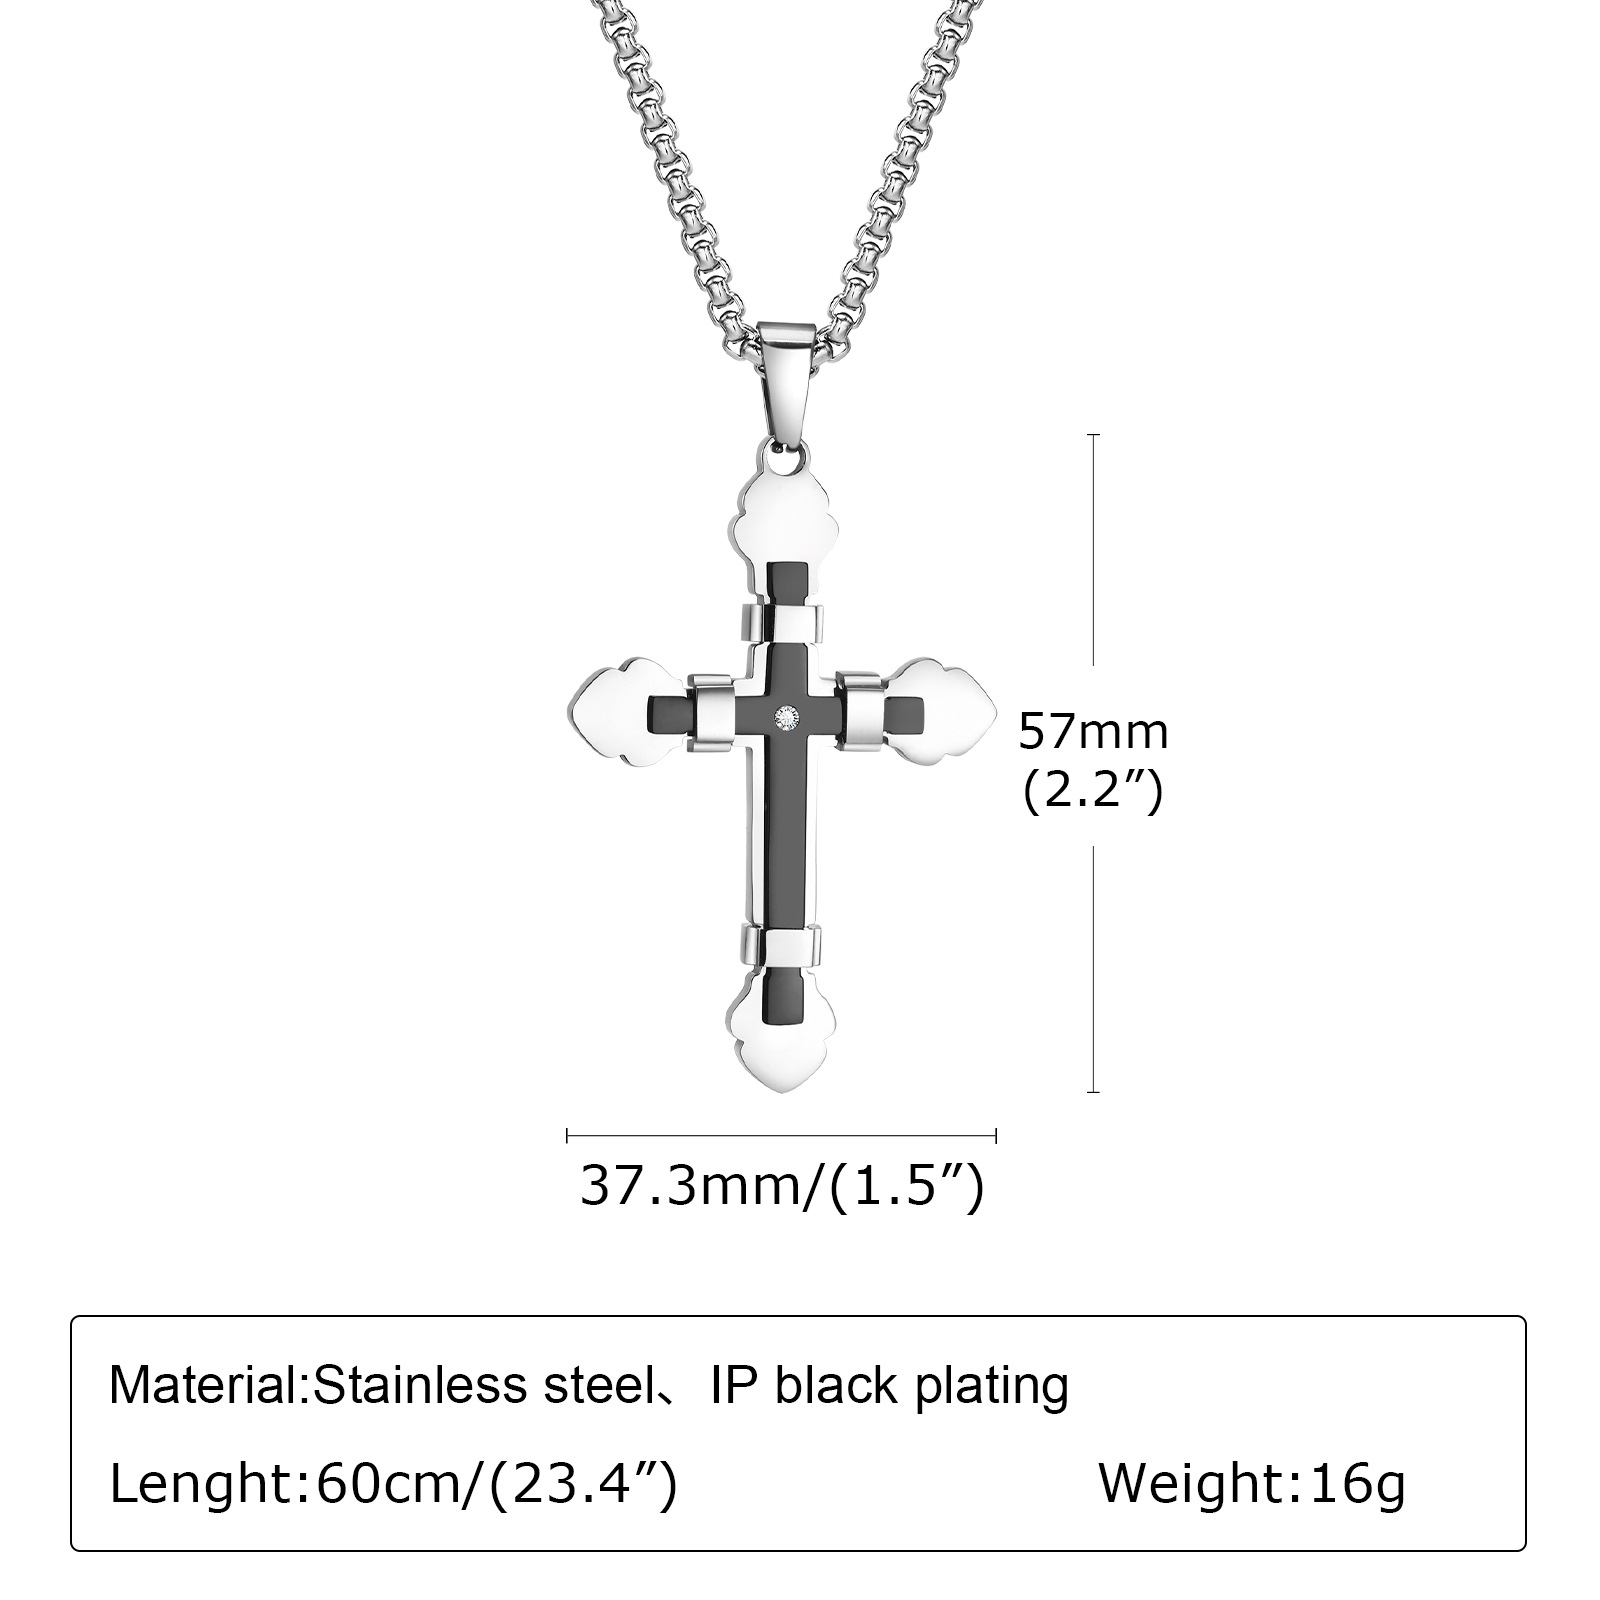 1:The pendant does not contain a chain